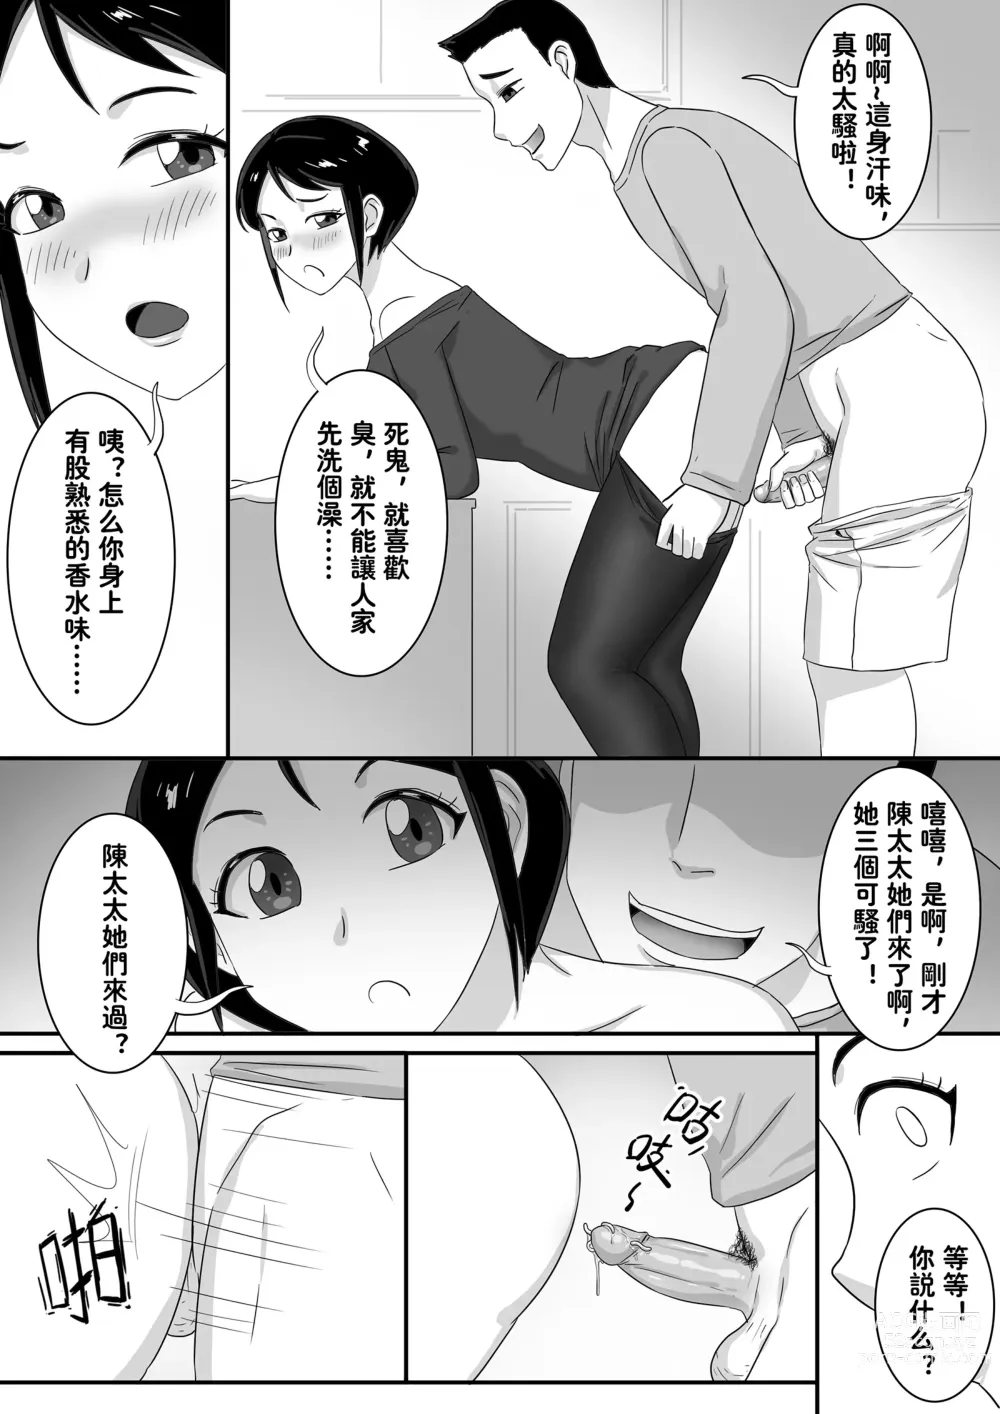 Page 22 of doujinshi Parasite Series The Neighbors